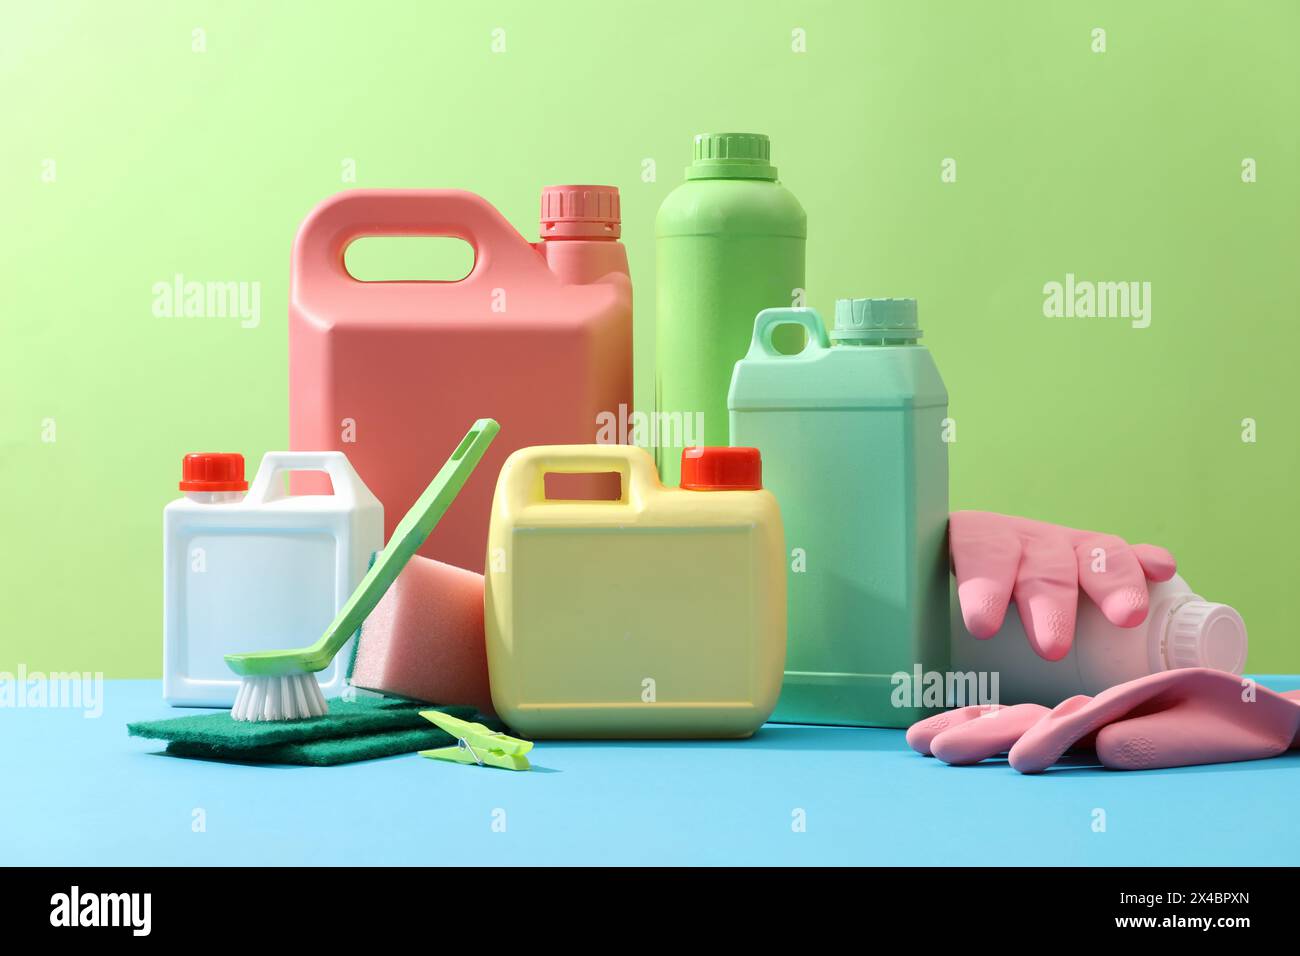 Cleaning products placed on a green background with empty bottles mockup for detergent product, rubber gloves, brushes and sponges. Creative ideas for Stock Photo